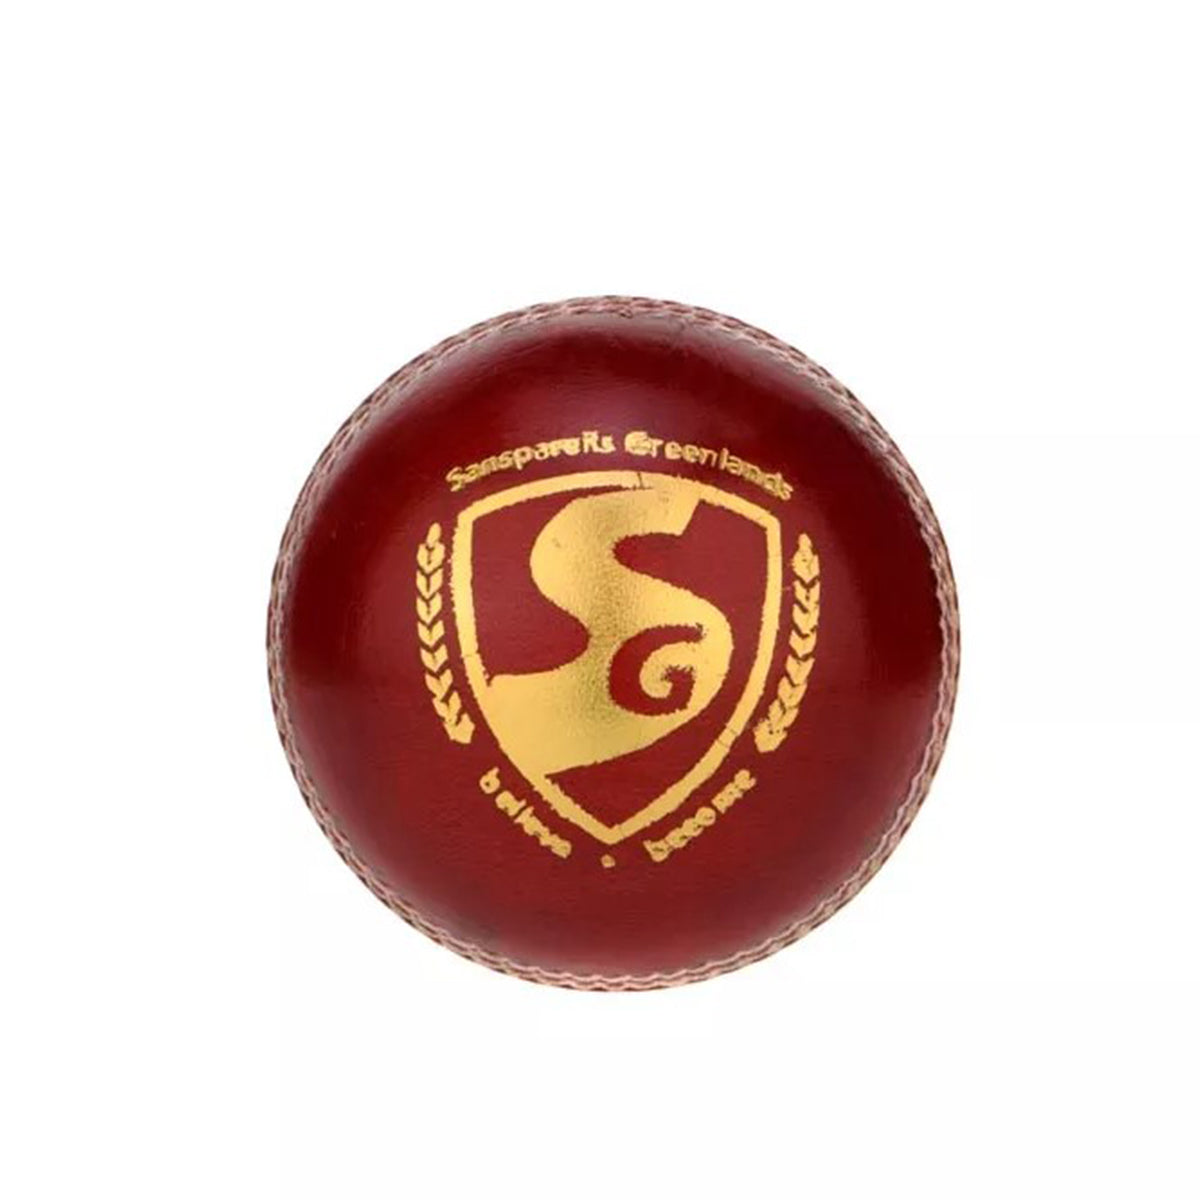 SG Shield 20 Red Leather Cricket Ball 2 Piece